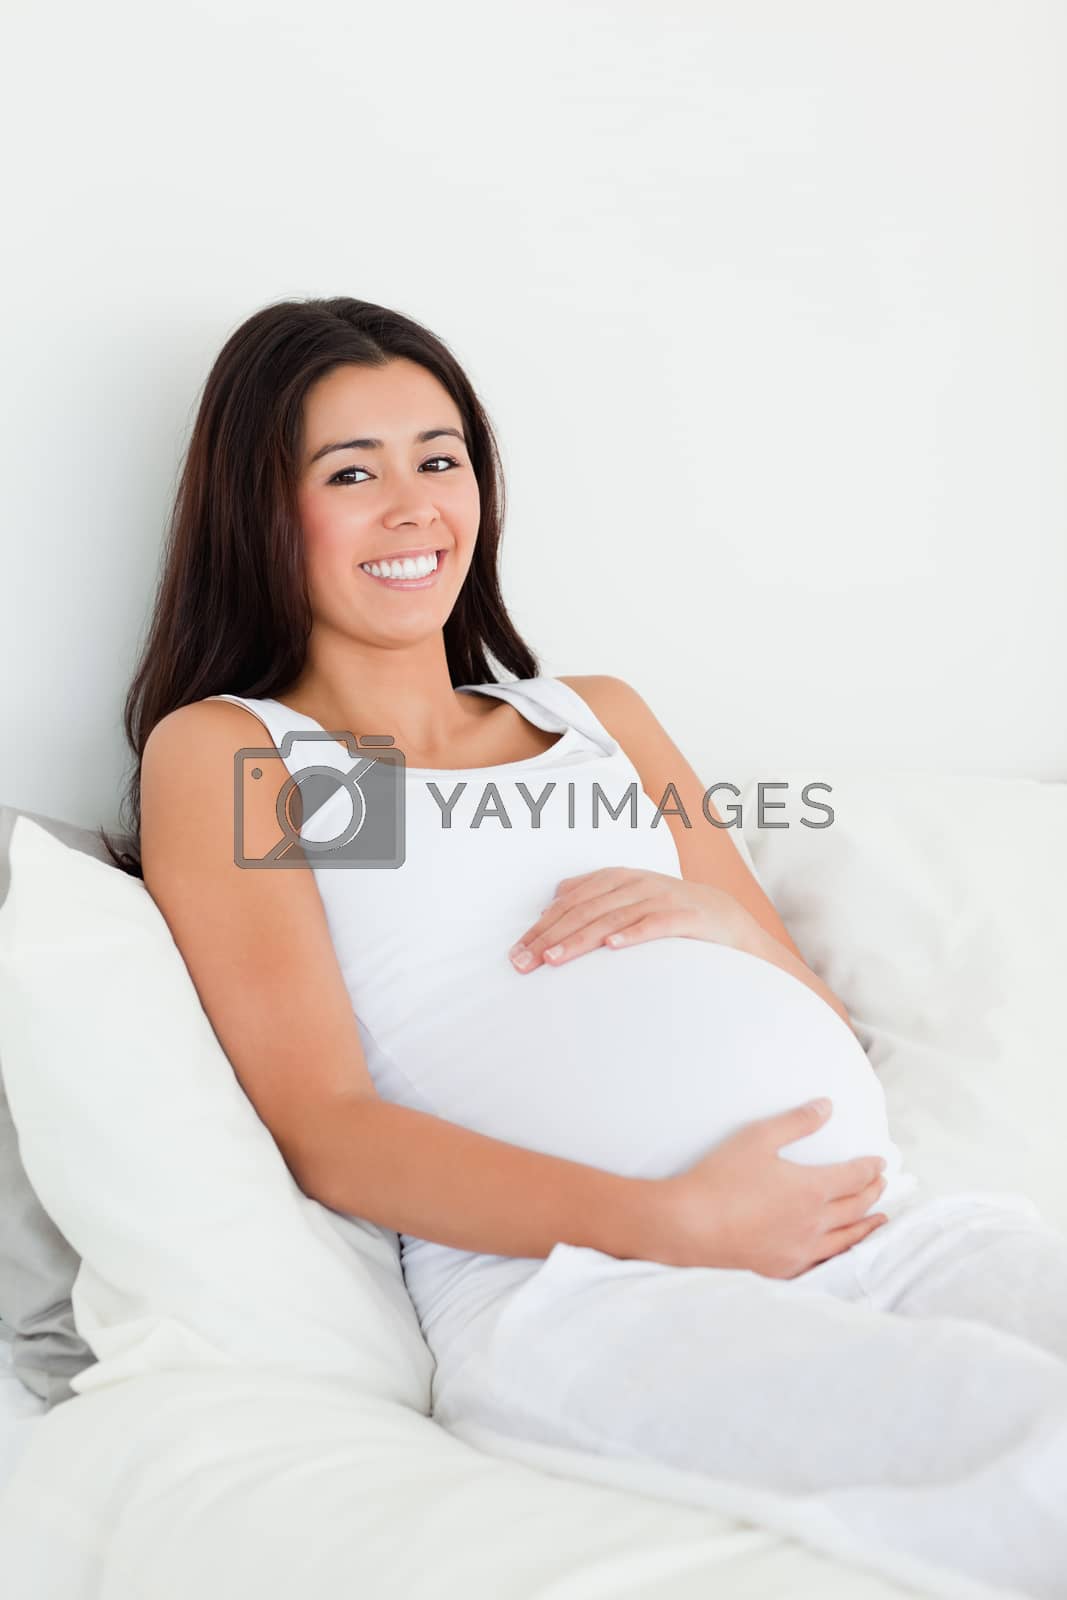 Royalty free image of Frontal view of a pretty pregnant woman touching her belly while lying on a bed by Wavebreakmedia